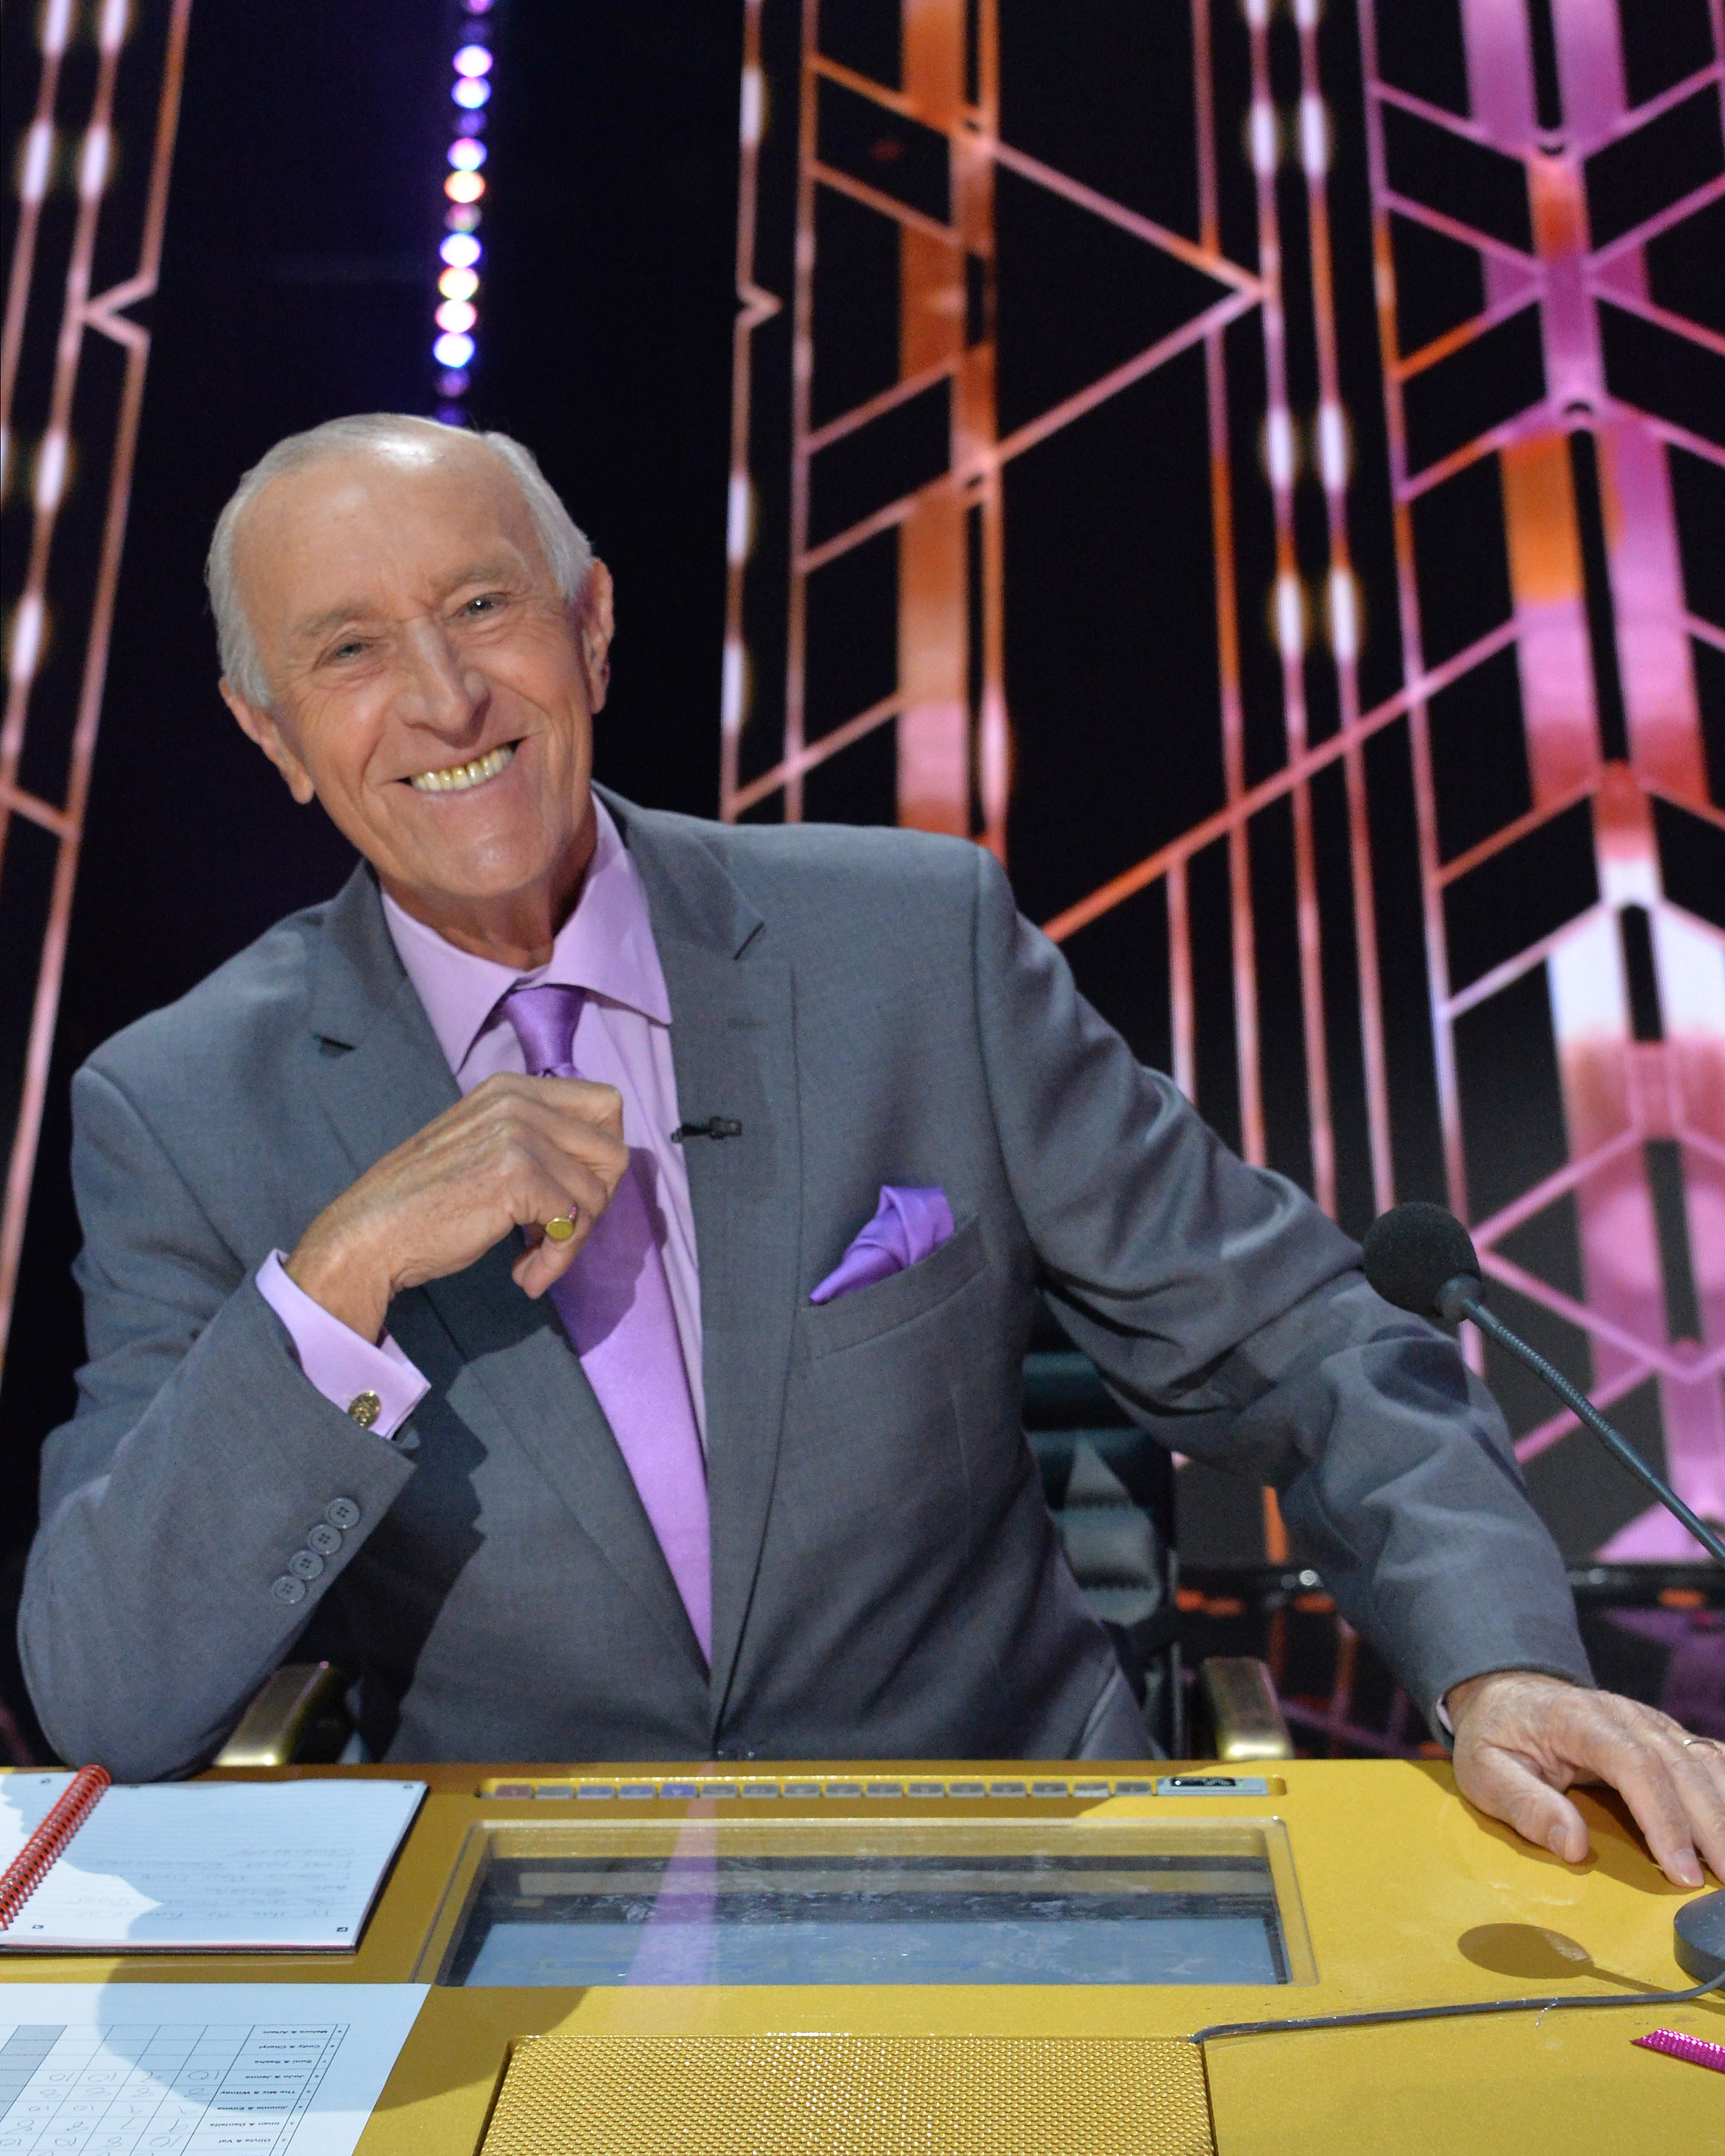 Len Goodman on "Dancing with the Stars" Season 30 in 2021 | Source: Getty Images